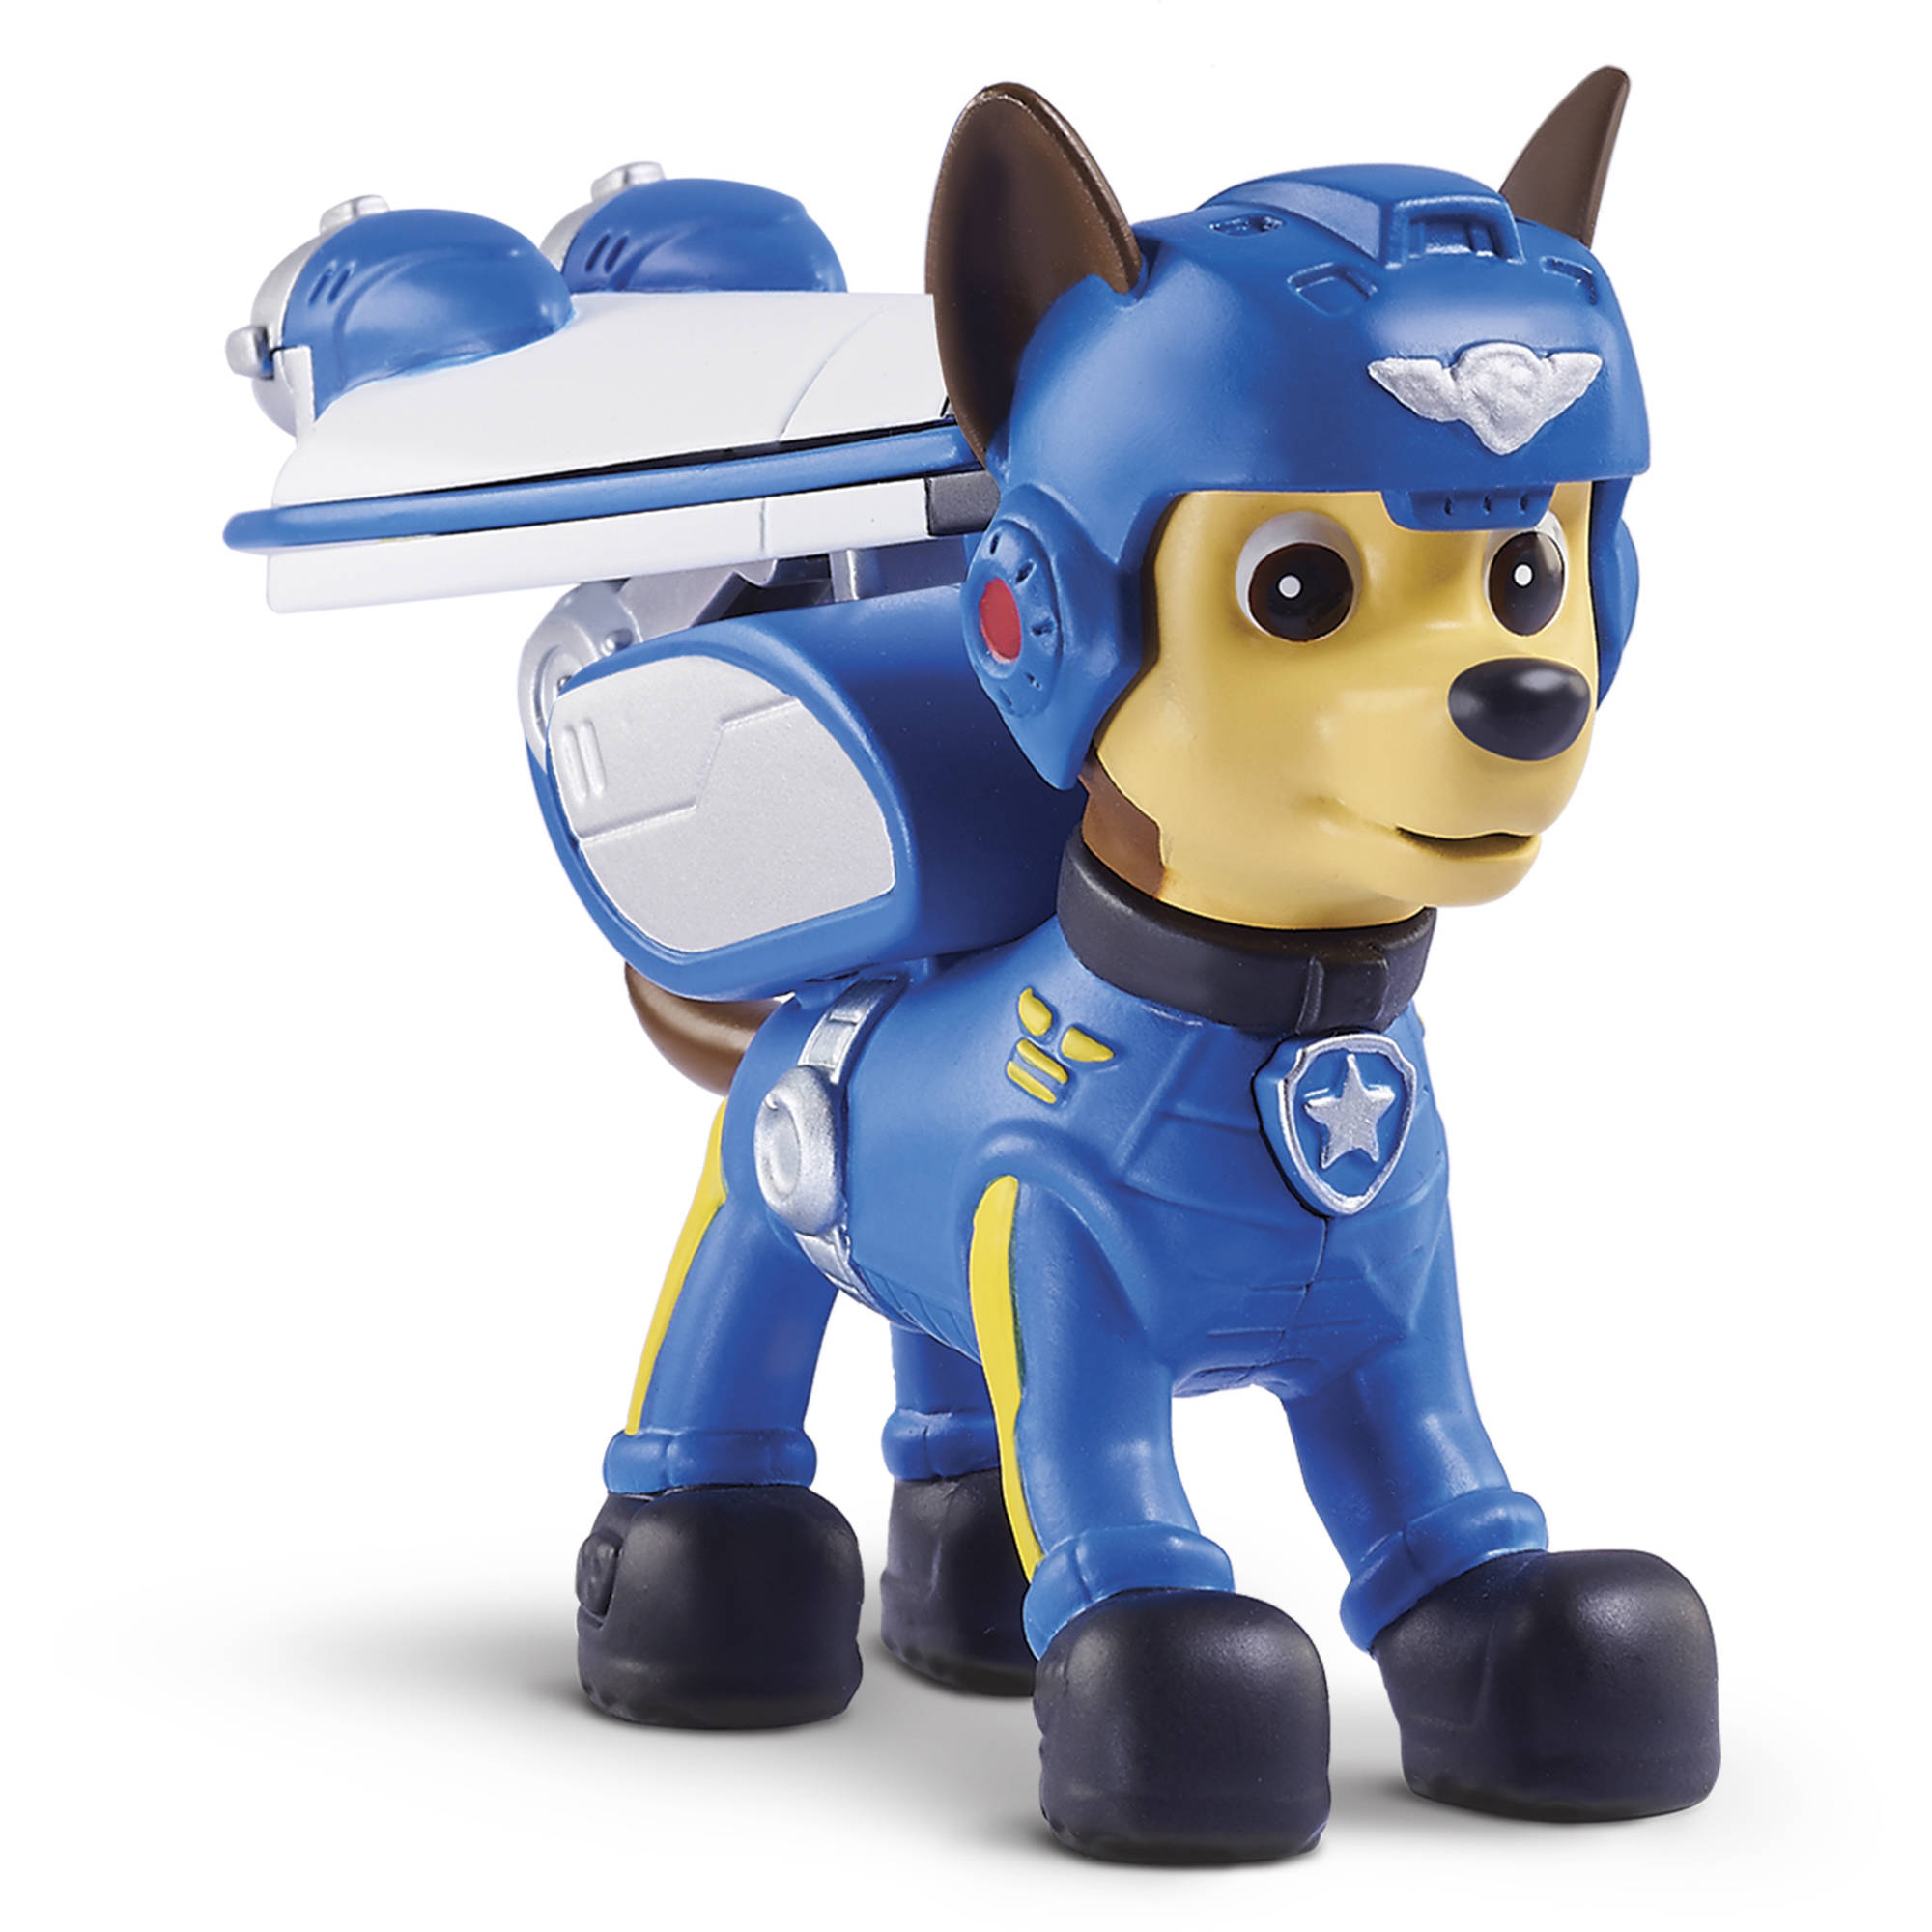 Images of Paw Patrol | 2000x2000